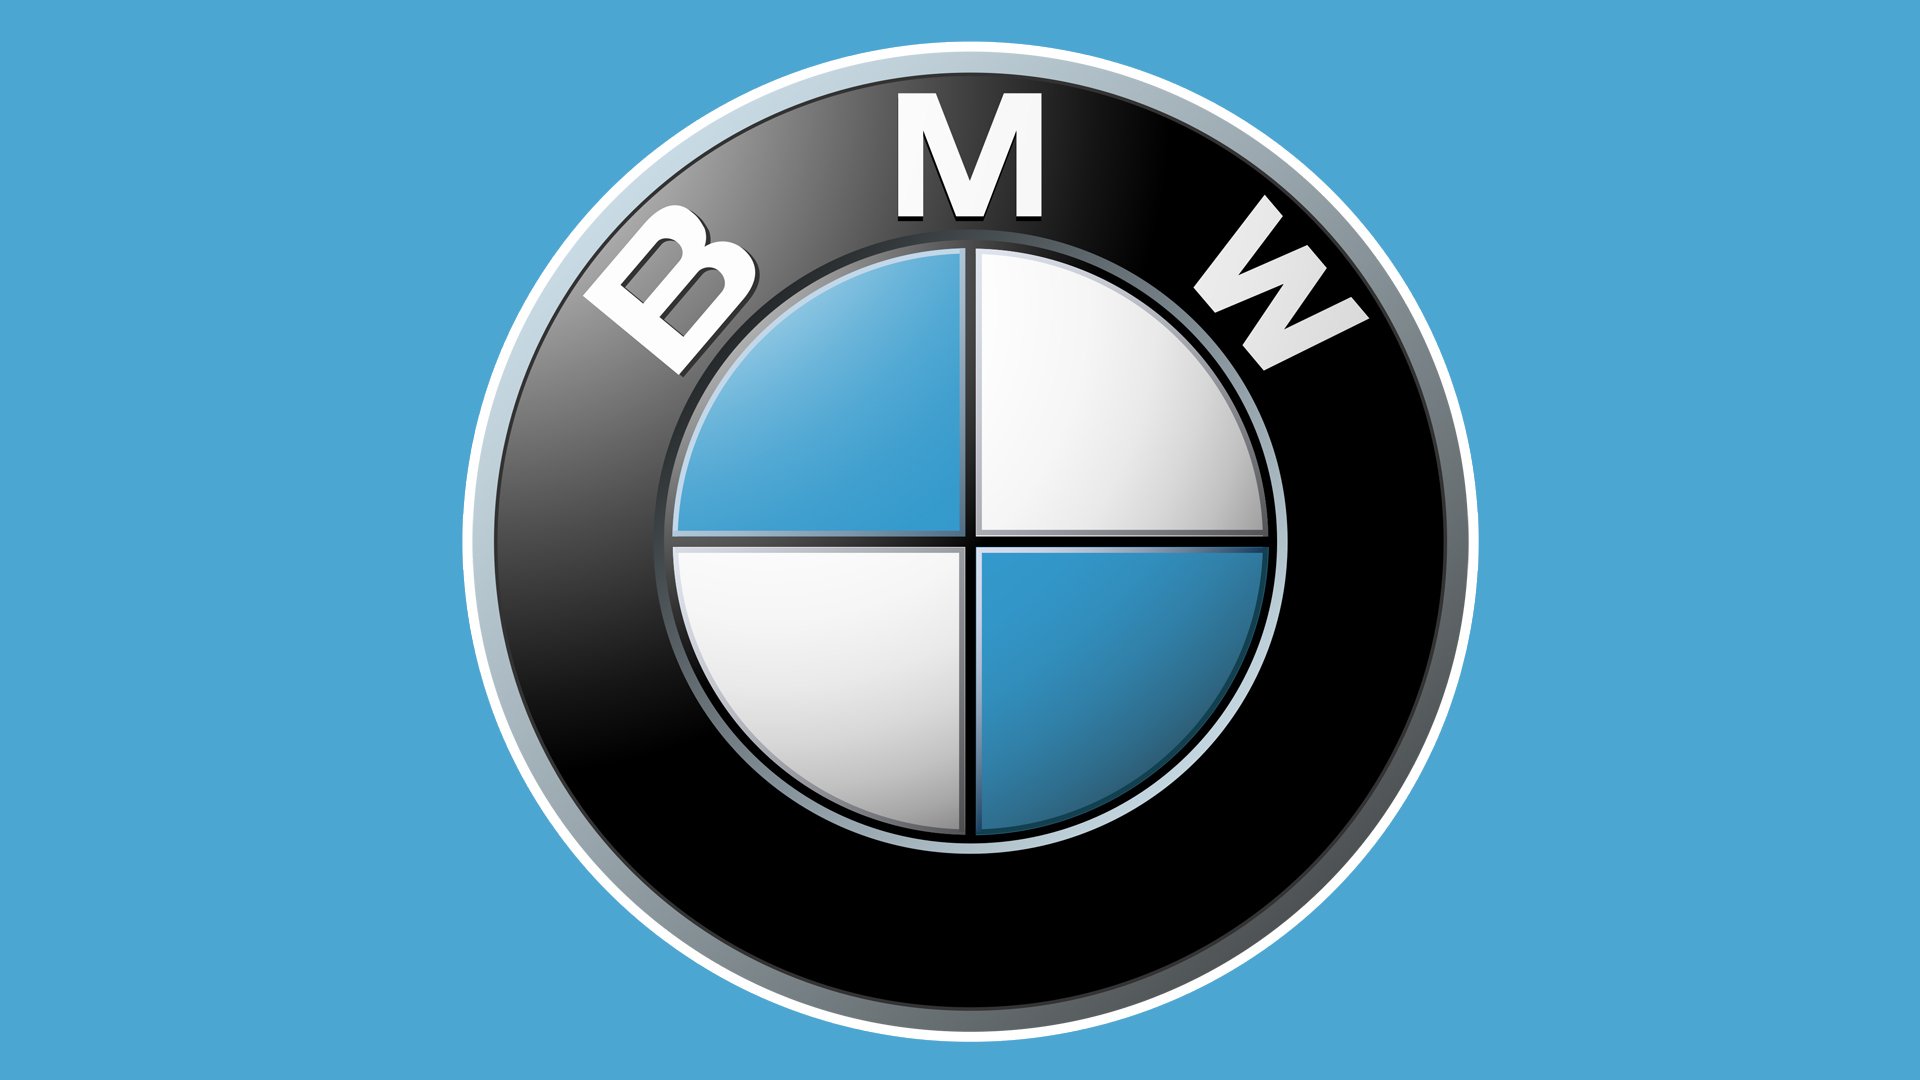 BMW Logo, BMW Symbol, Meaning, History and Evolution